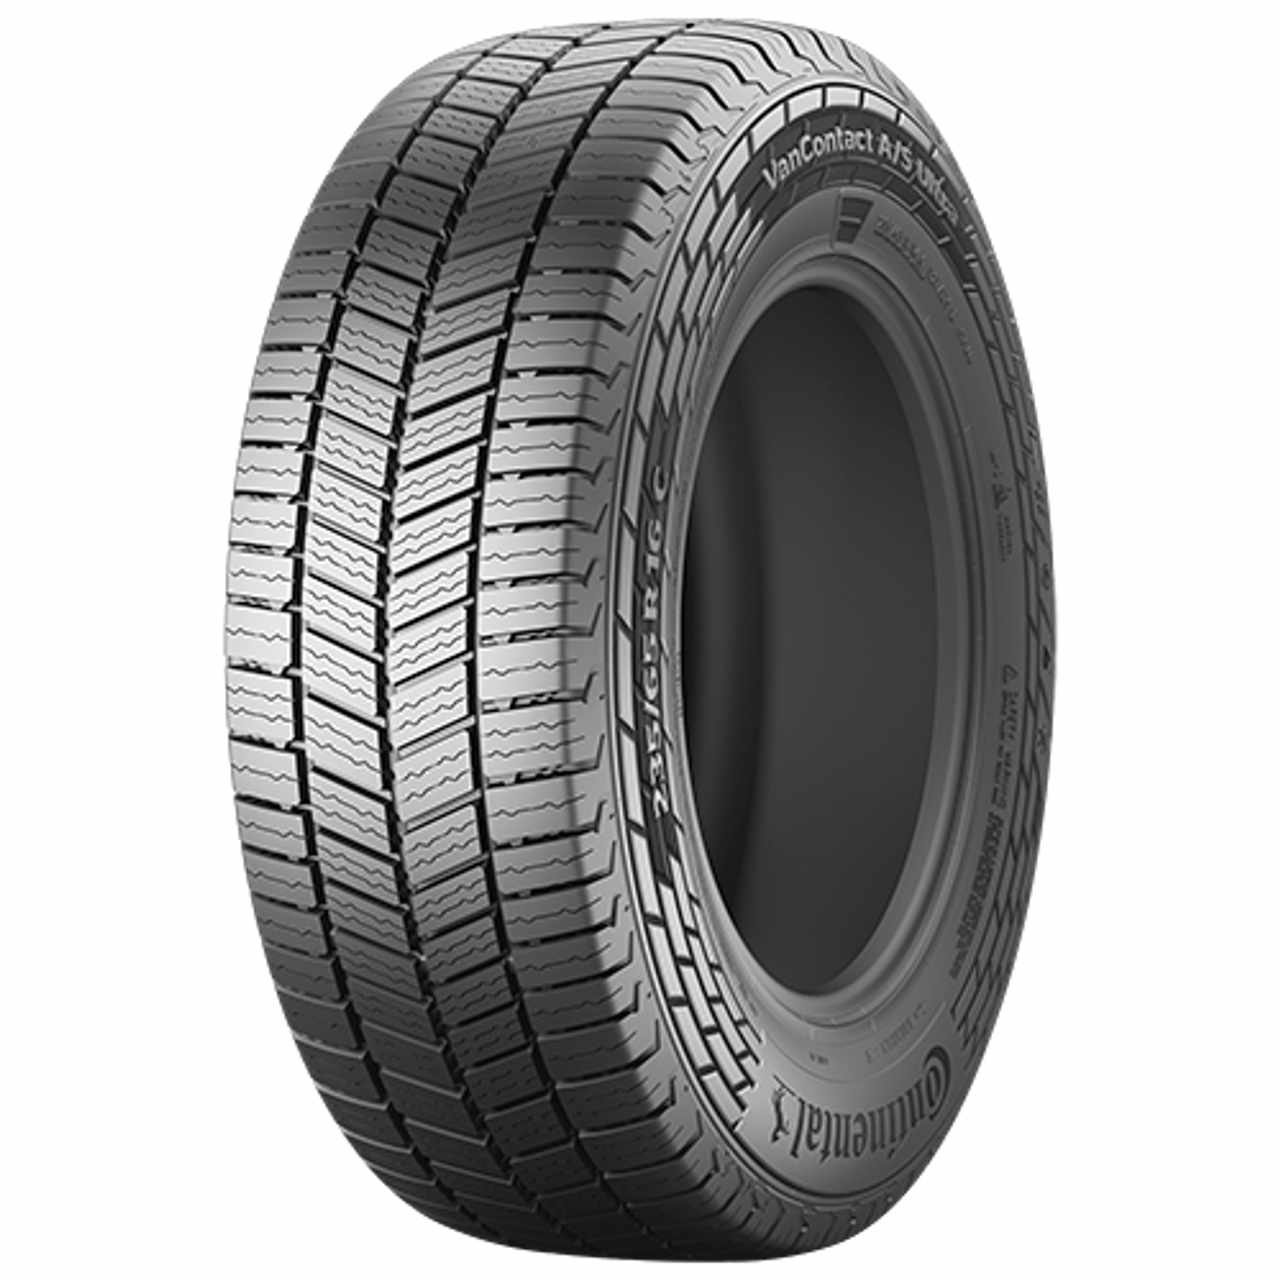 CONTINENTAL VANCONTACT A/S ULTRA 195/75R16C 107R BSW